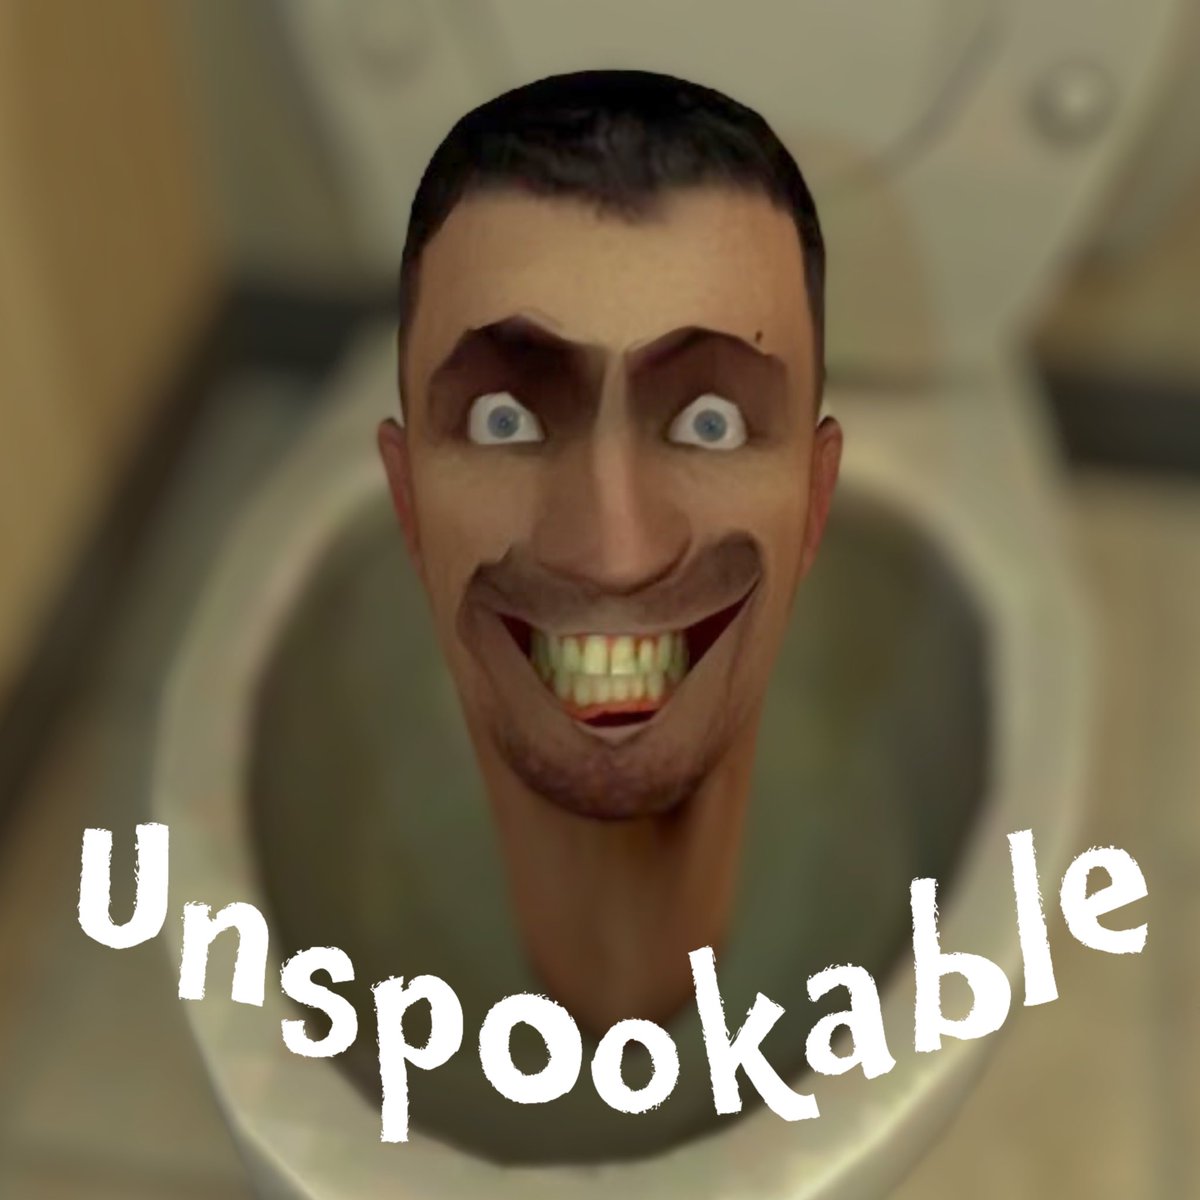 What is Skibidi Toilet? And how did this web series overtake our culture? Unspookable attempts to flush out the truth on our latest episode. #skibiditoilet #skibidi podcasts.apple.com/us/podcast/uns…